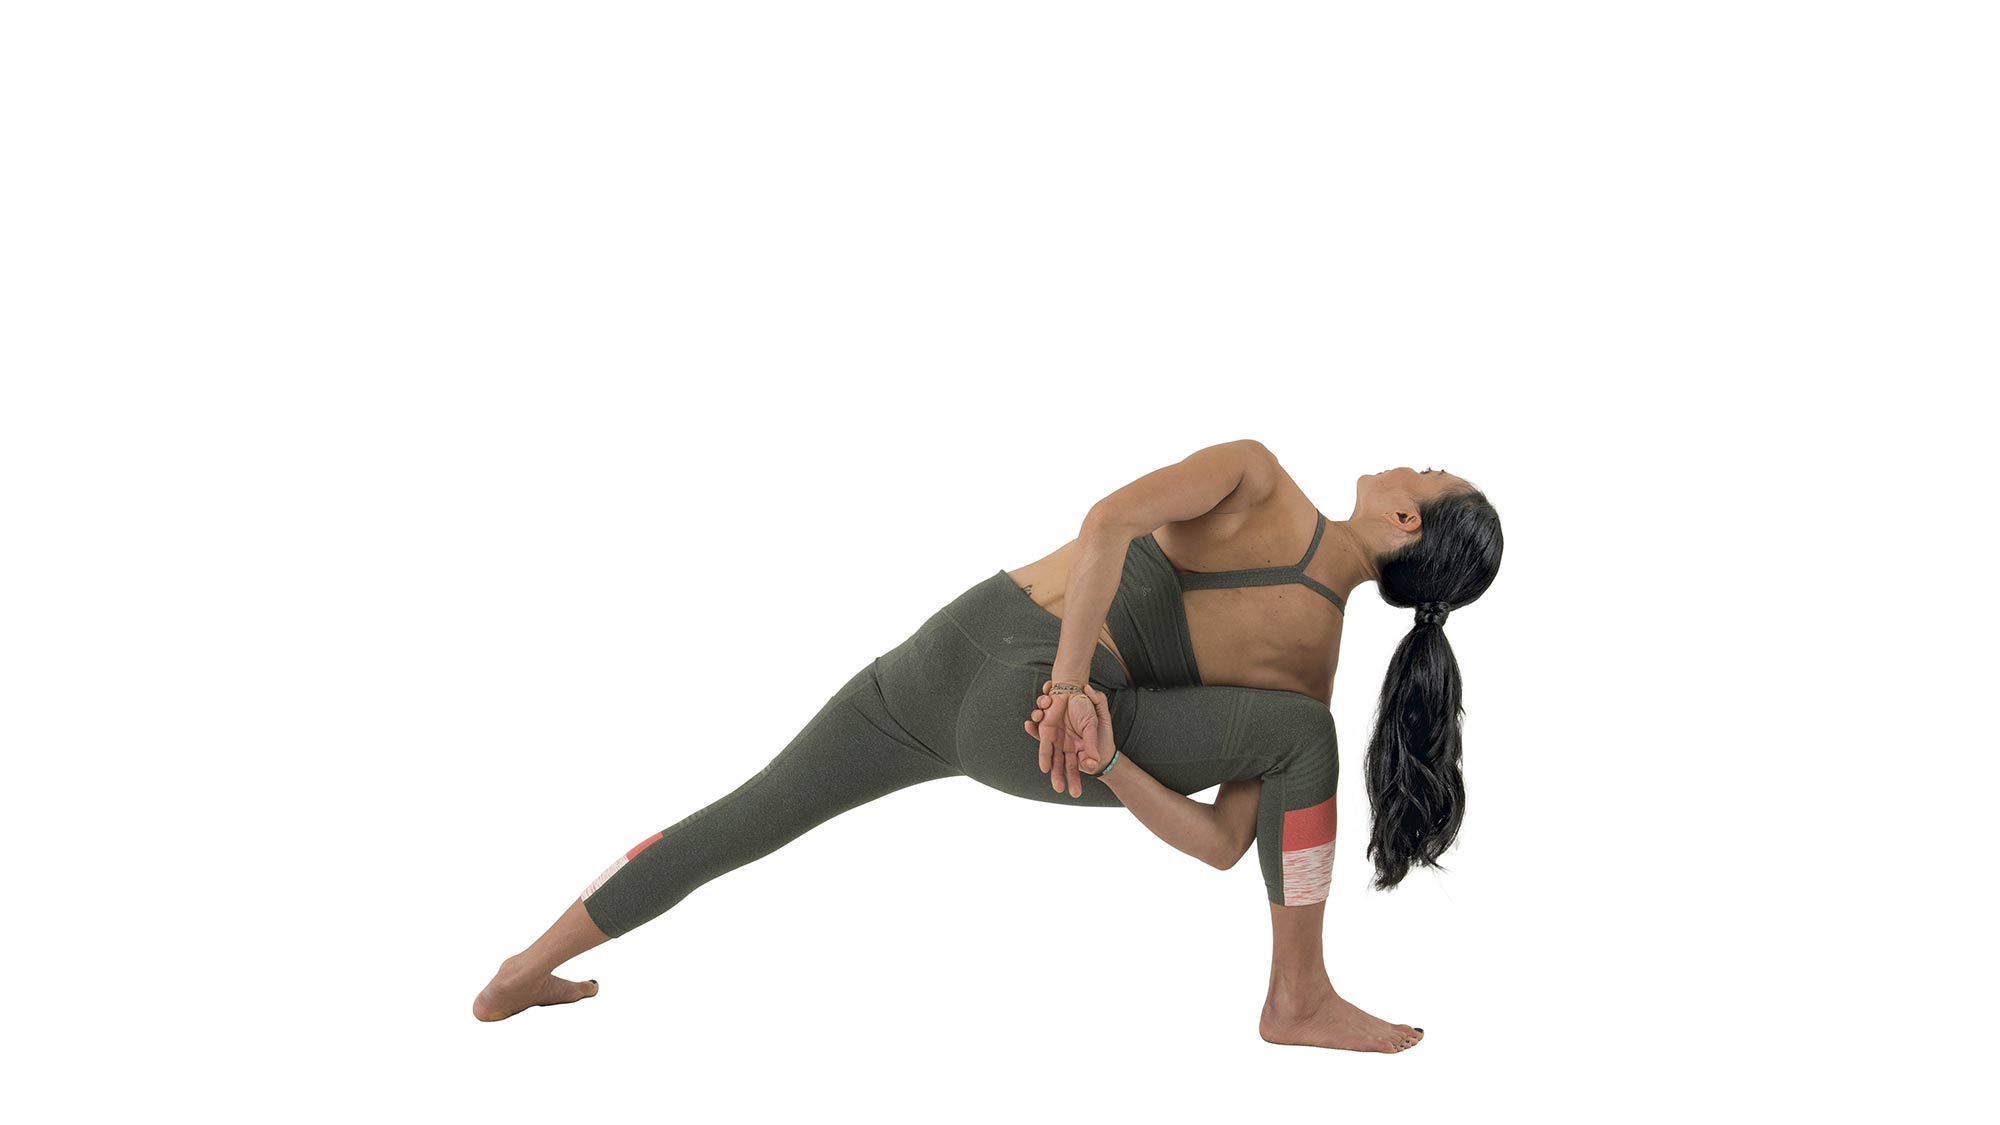 Lizard Pose: 8 Steps to Open Your Hips | LoveToKnow Health & Wellness